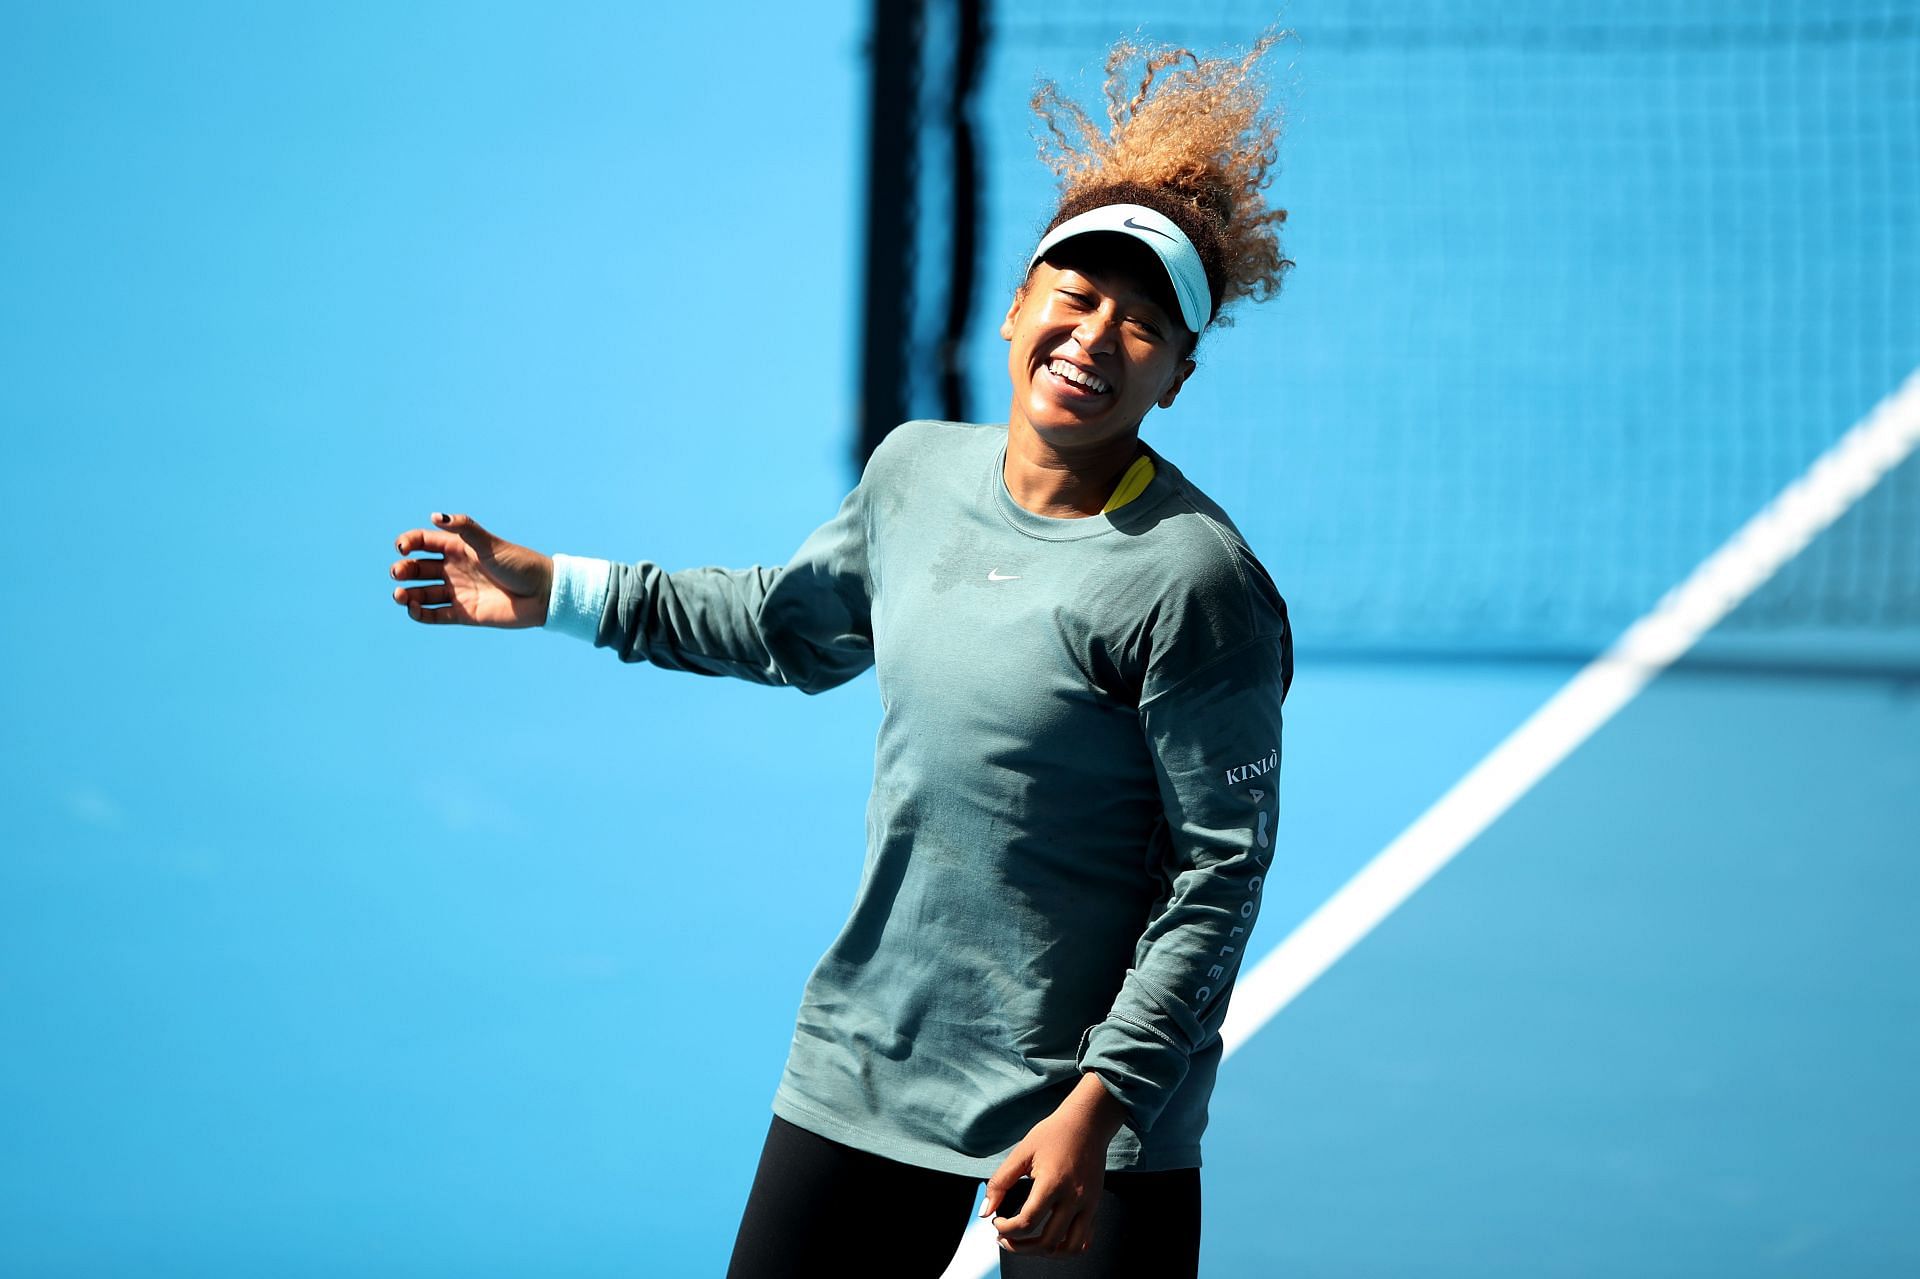 Naomi Osaka needed less than an hour to seal a spot in the quarterfinals of the Melbourne Summer Set